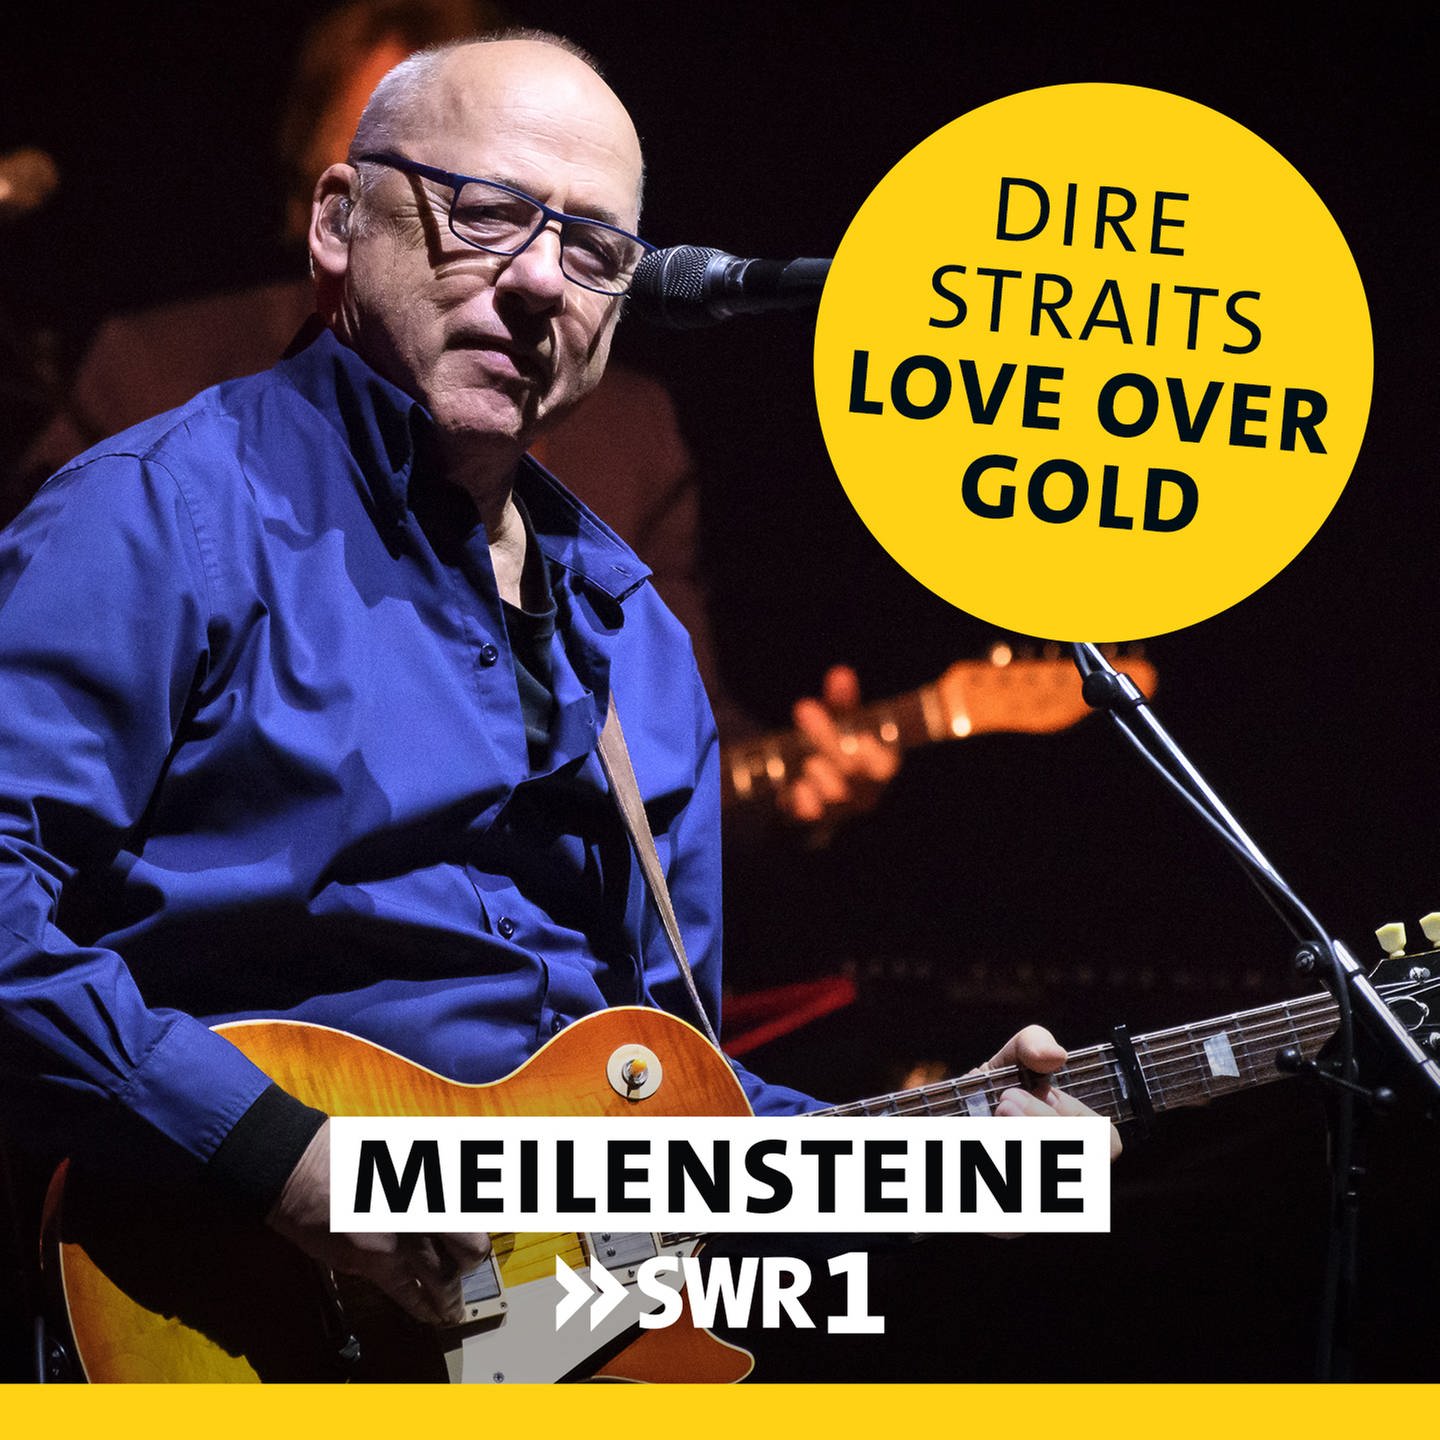 dire straits love over gold tour